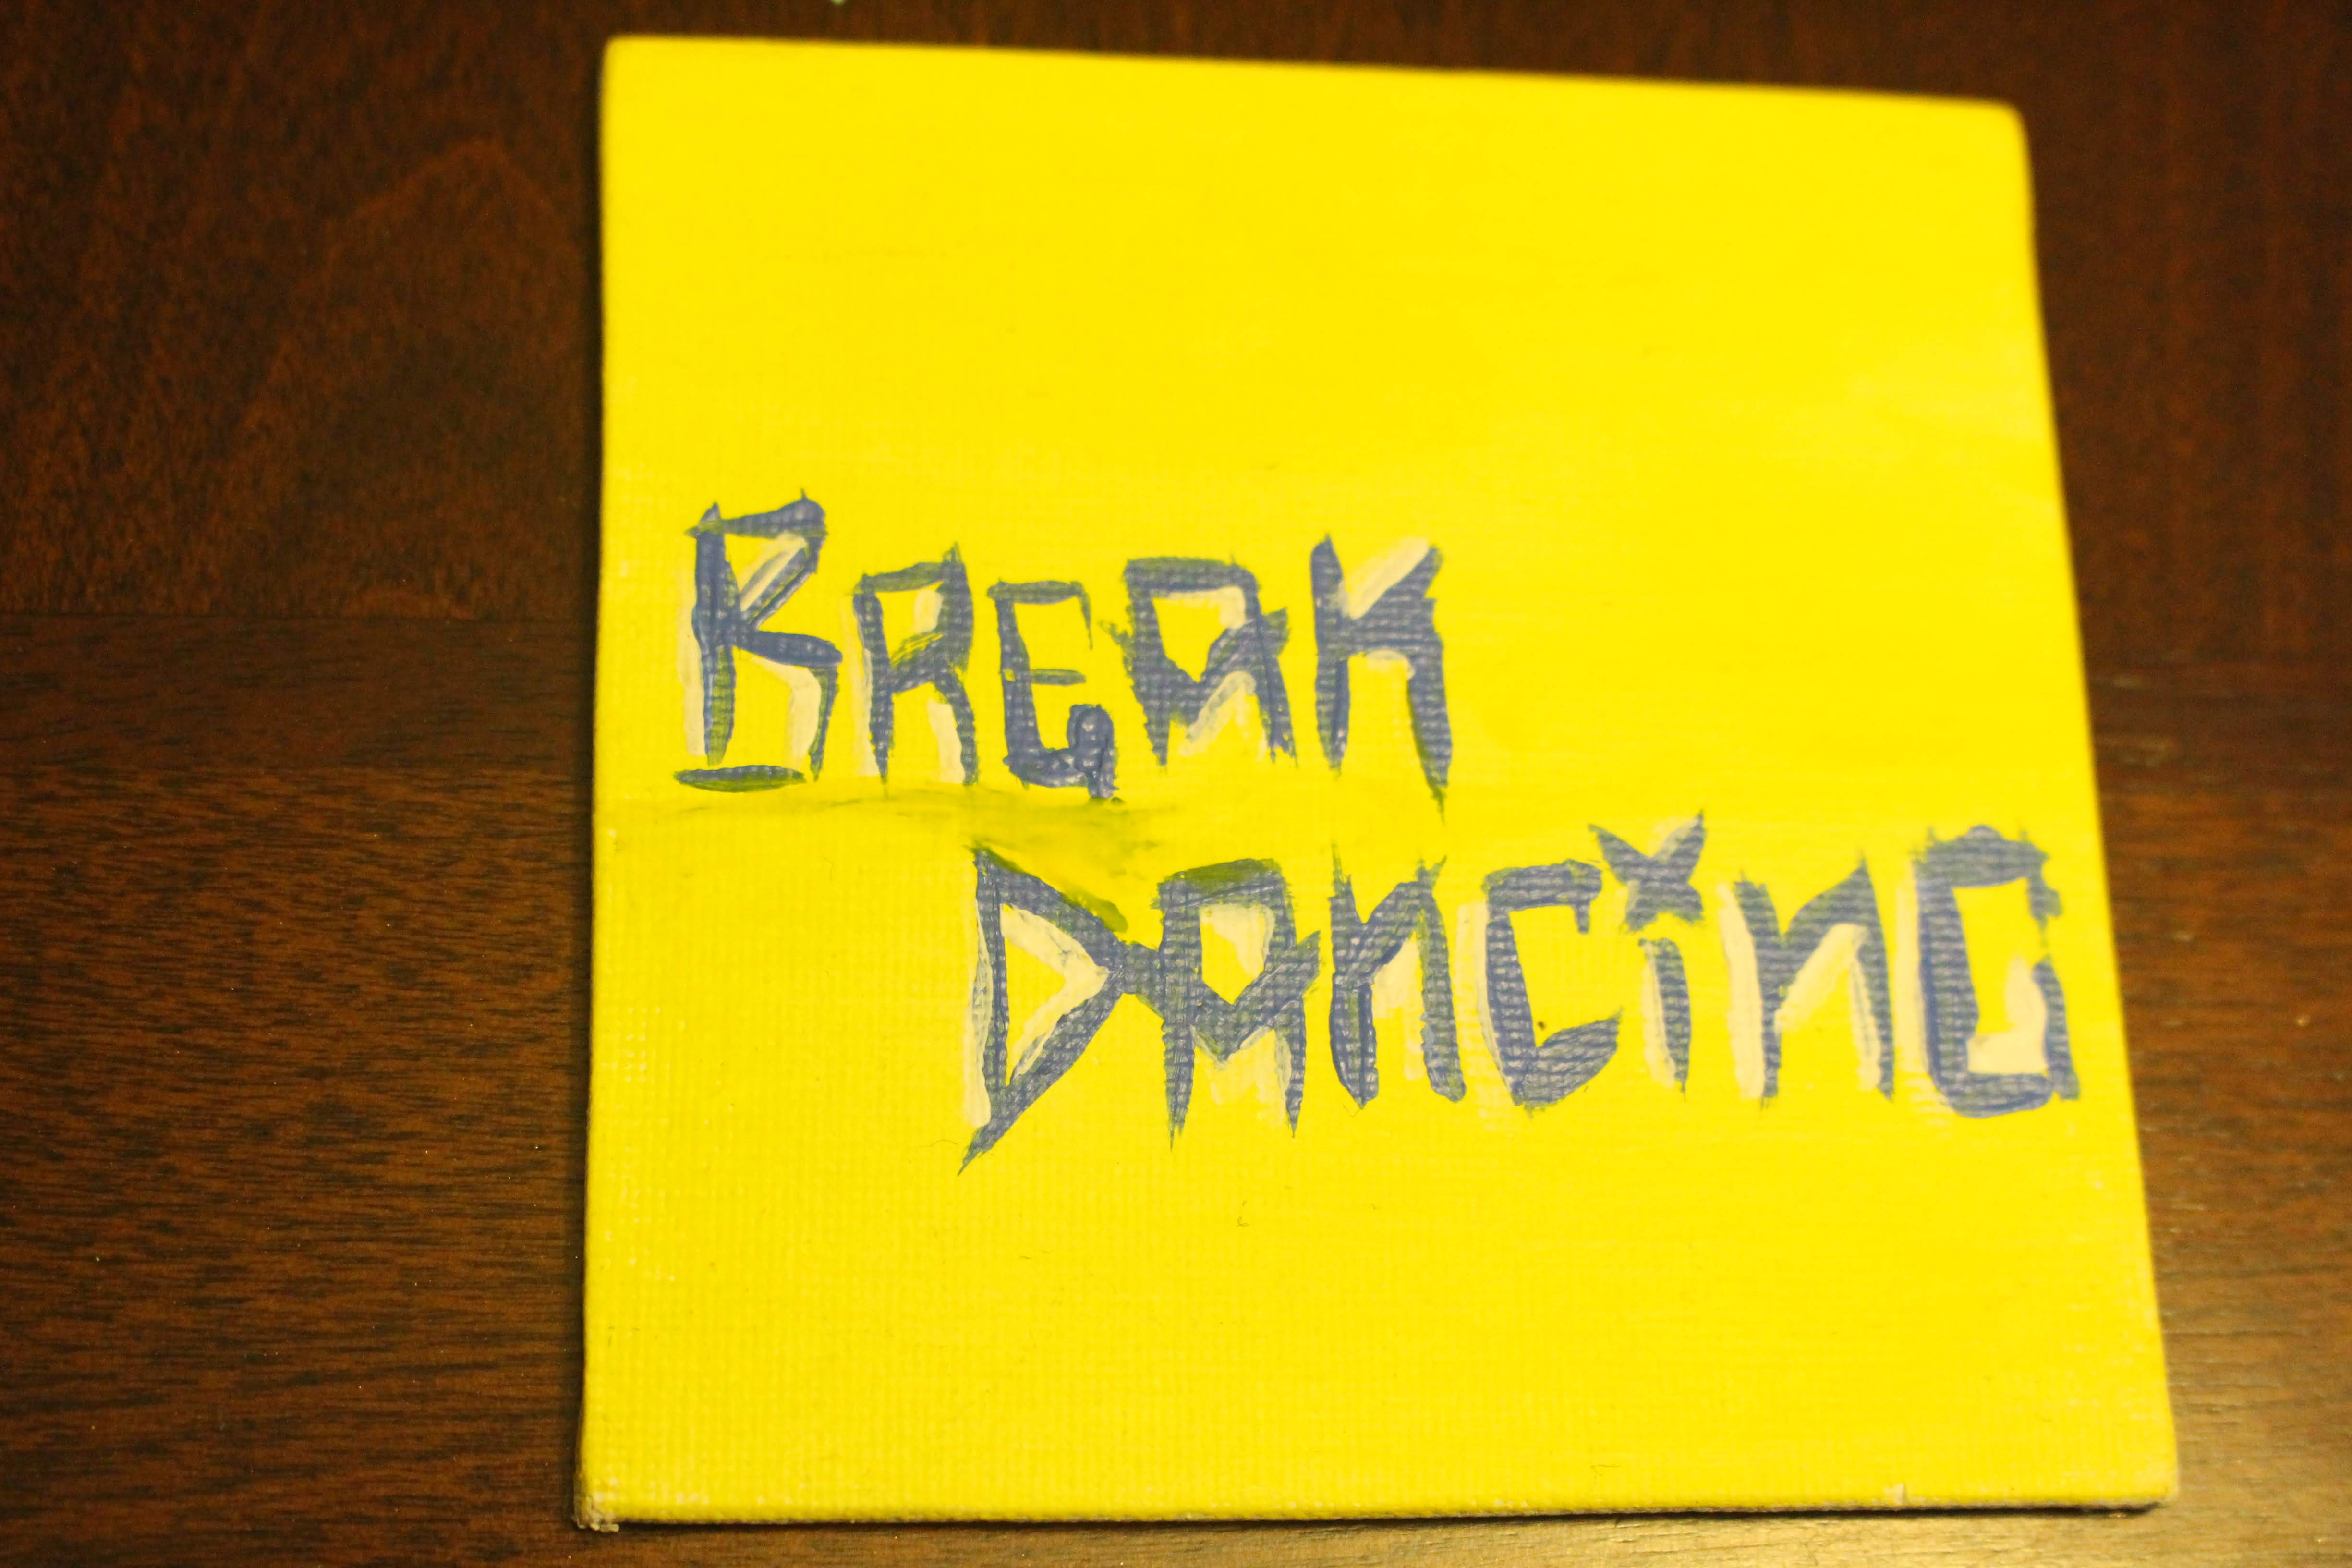 This is a painting of the word ‘break dancing’ on a mini canvas. This word represents one of the ‘four elements of hip hop”.